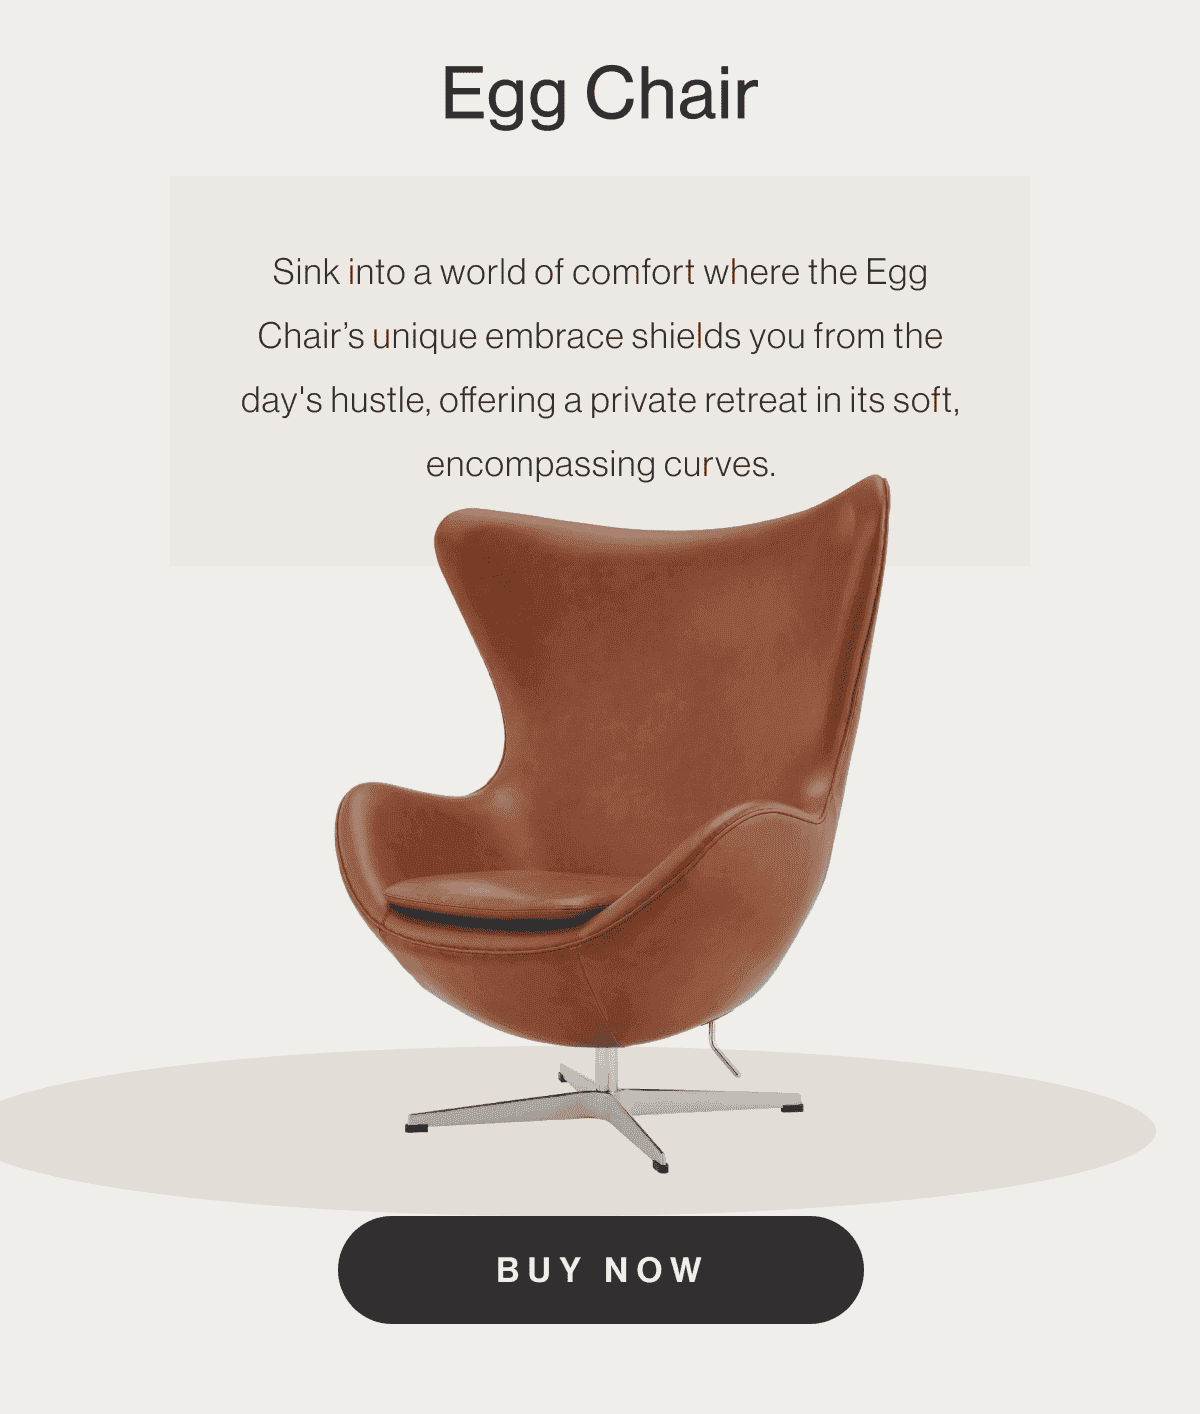 Egg Chair - Sink into a world of comfort where the Egg Chair’s unique embrace shields you from the day's hustle, offering a private retreat in its soft, encompassing curves. - Buy Now